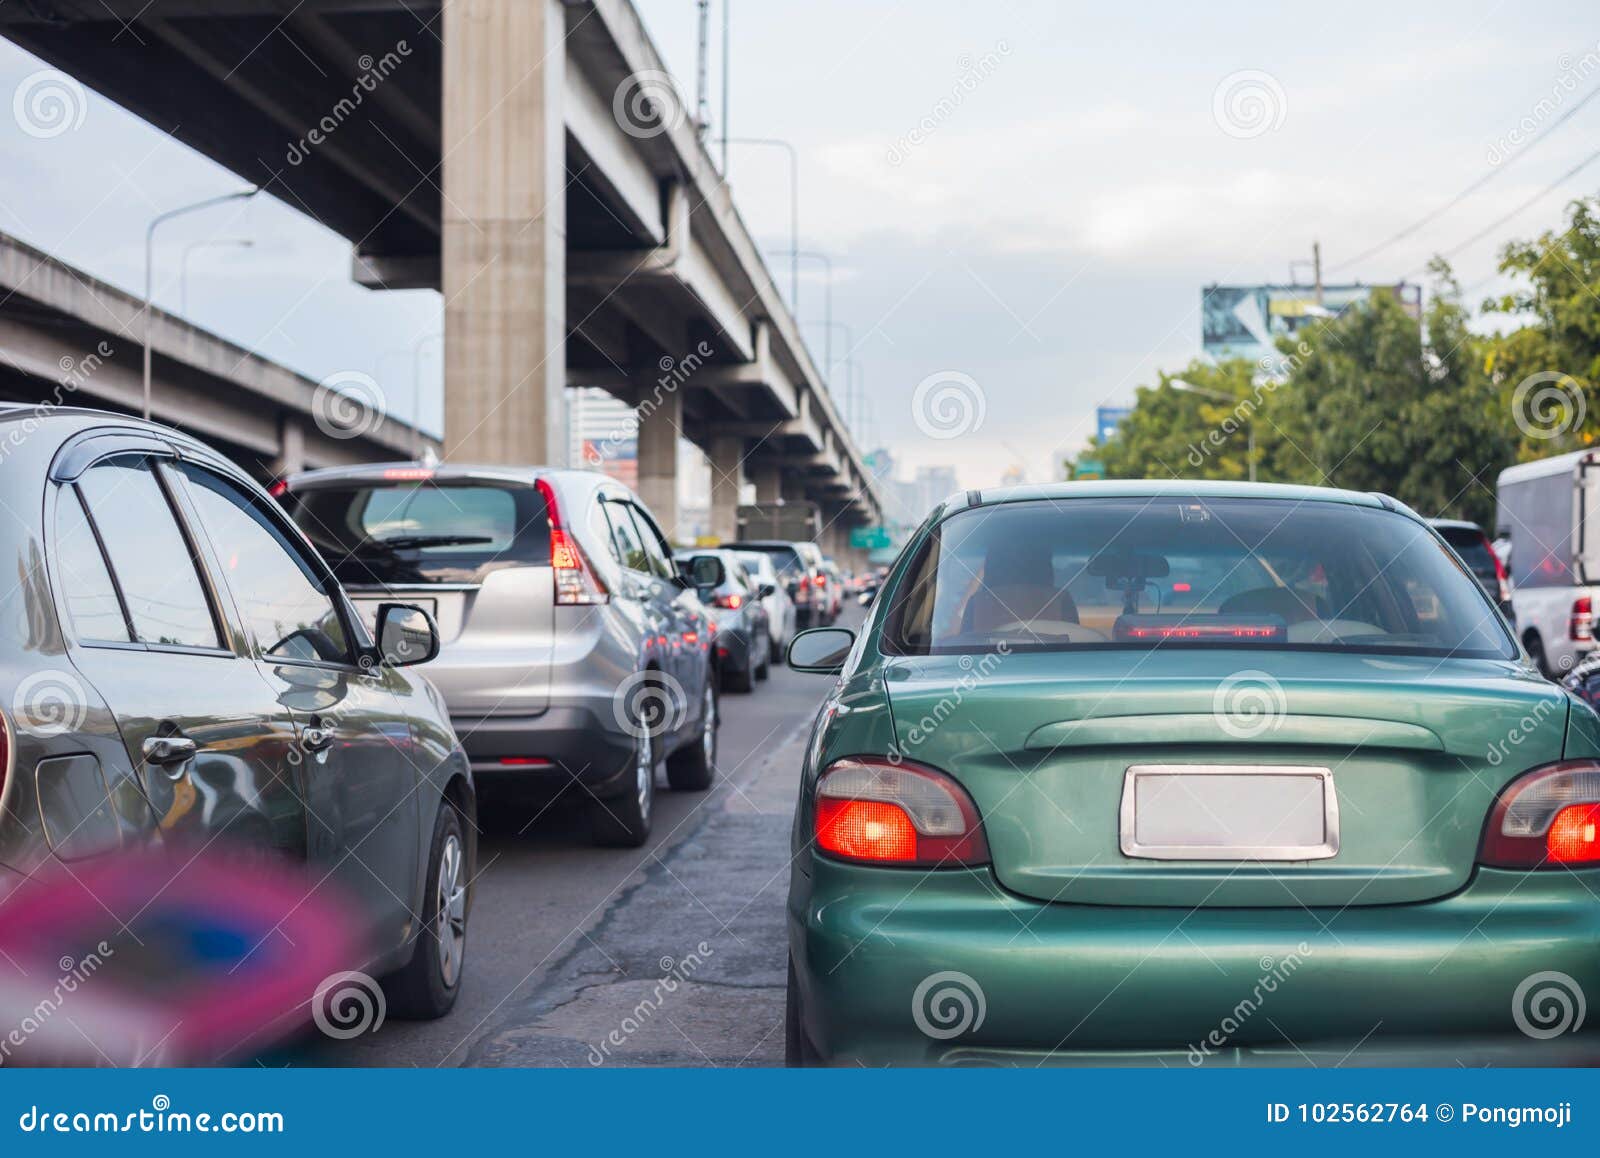 cars on busy road in the city with traffic jam